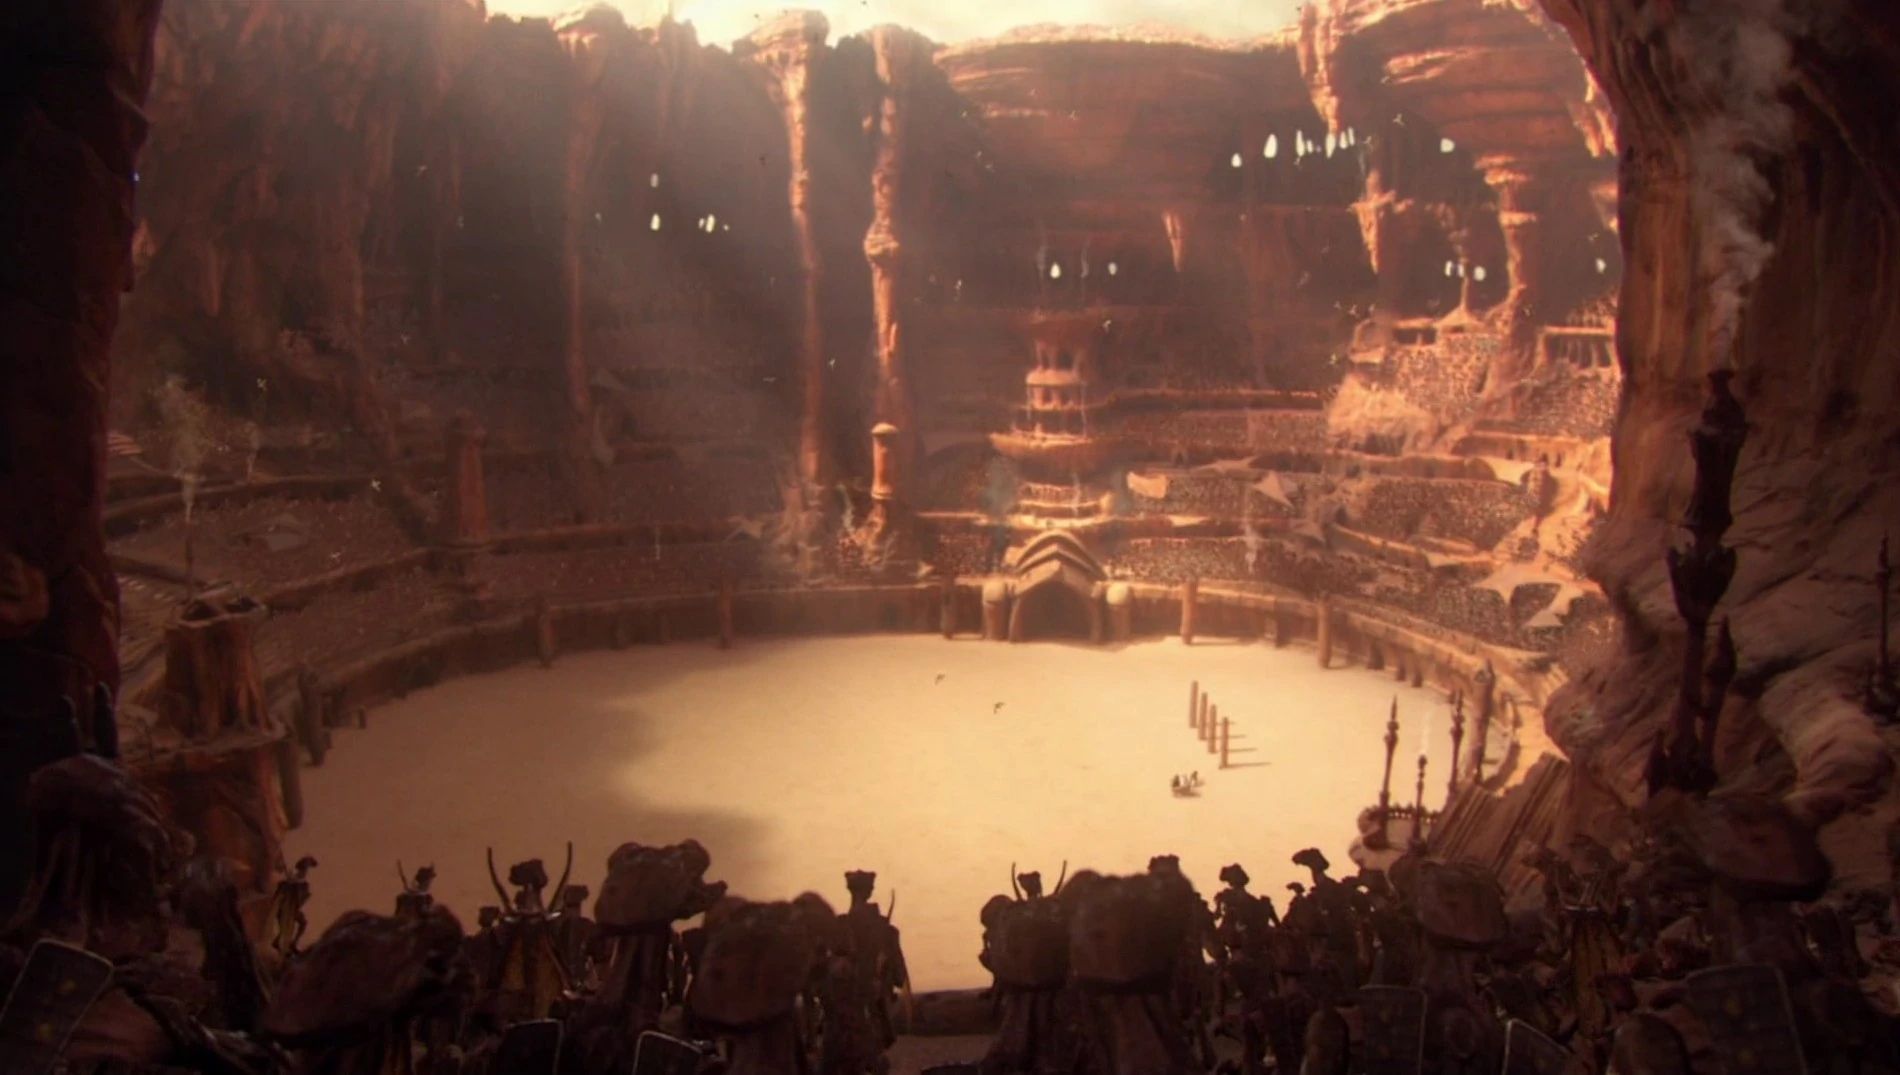 Geonosis execution arena from Attack of the Clones